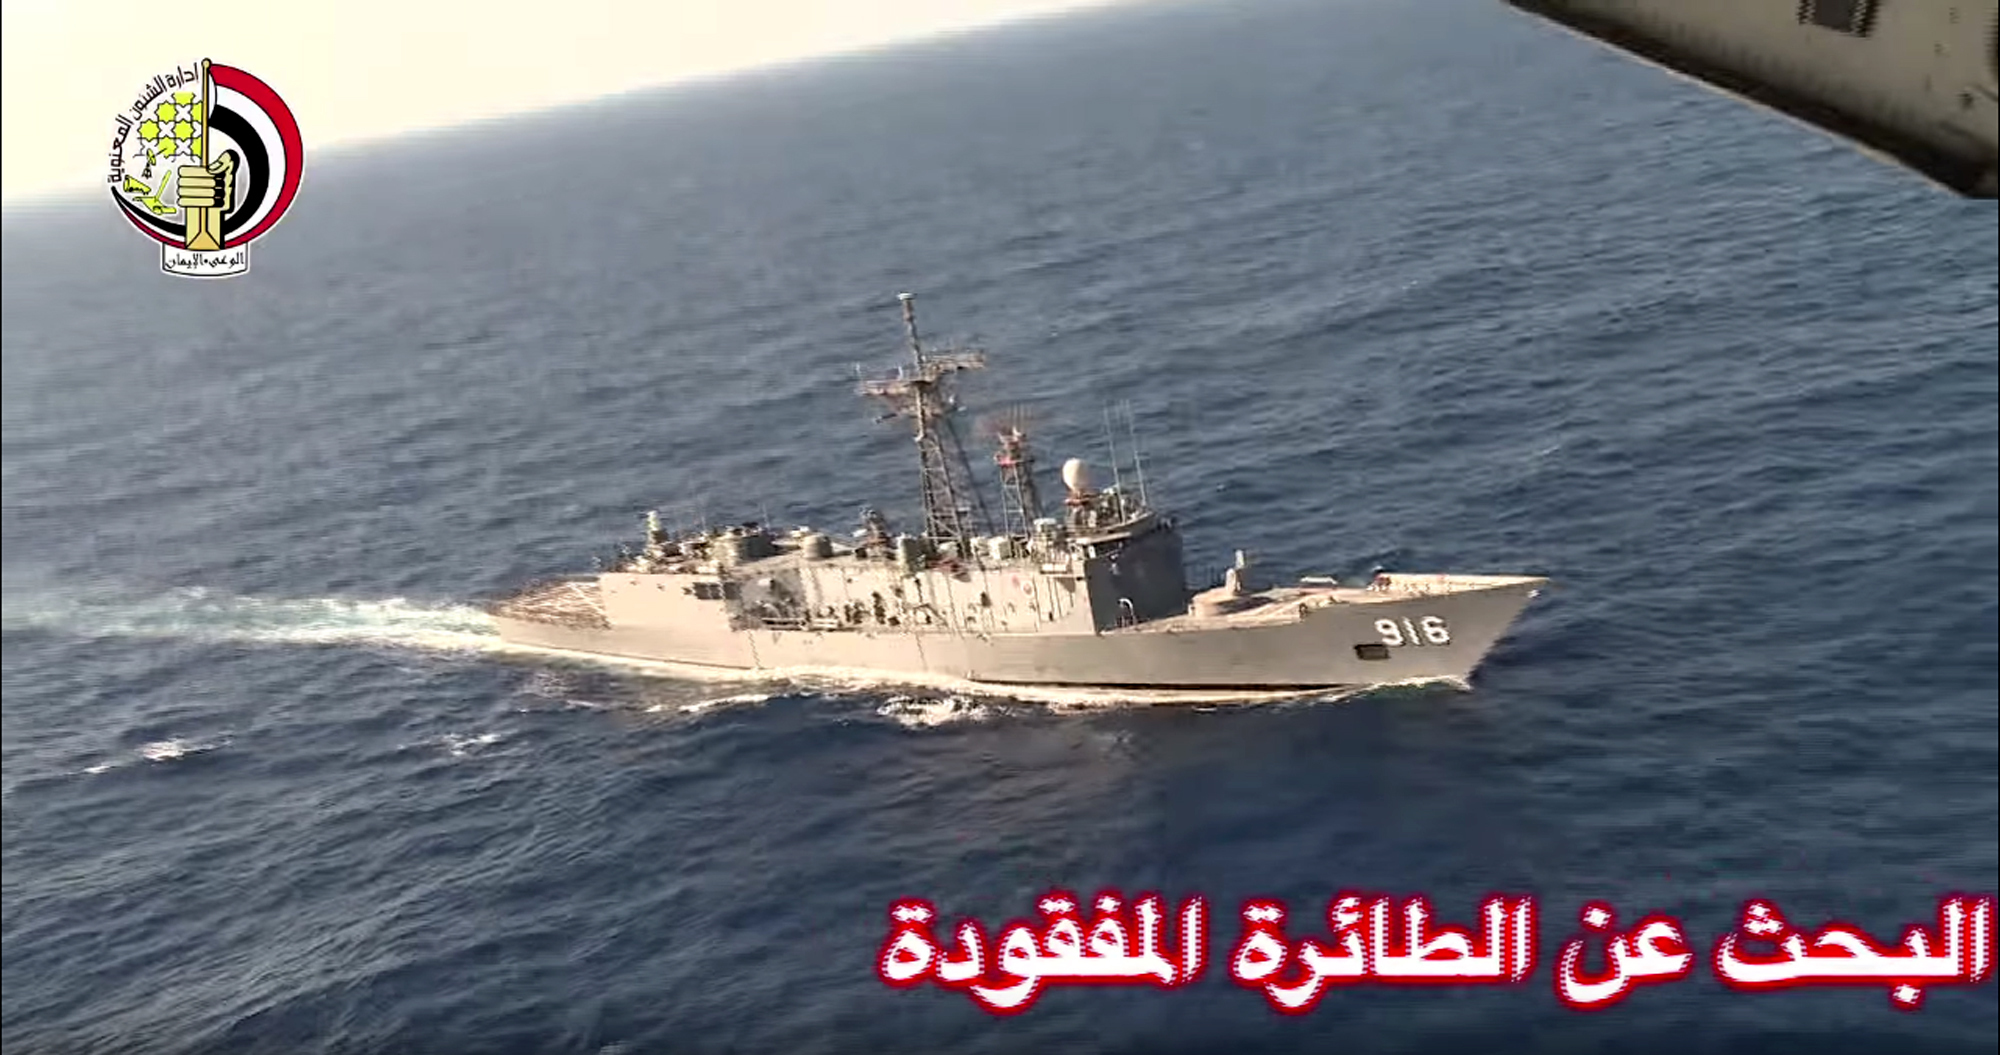 PHOTO: A video image released by the Egyptian Defense Ministry, an Egyptian plane flies over a ship during the search in the Mediterranean Sea for the missing EgyptAir flight 804 plane, May 19, 2016.